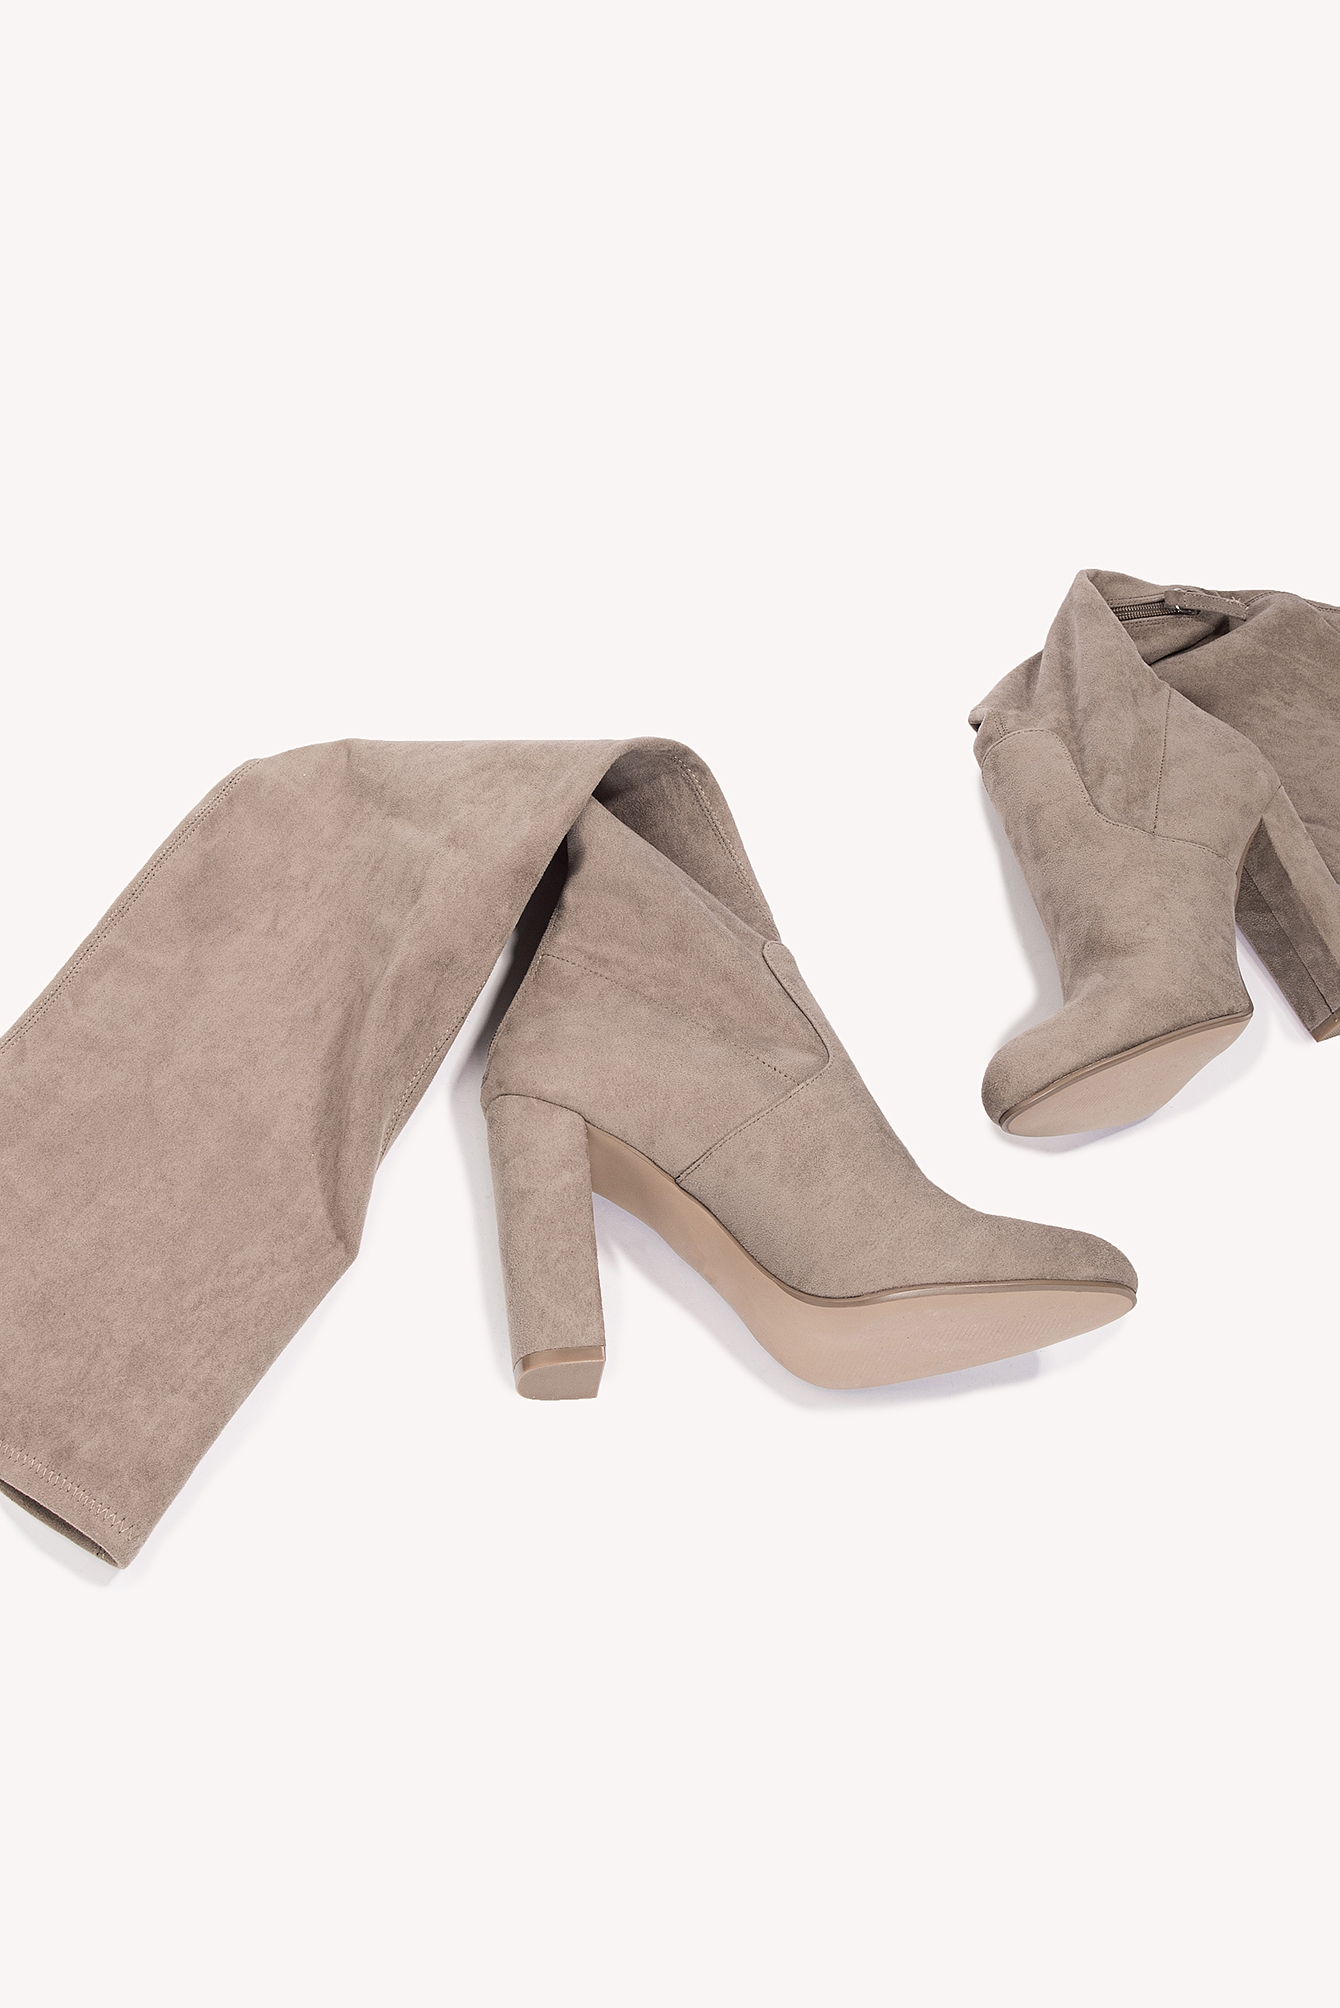 Taupe Emotions Overknee Boot